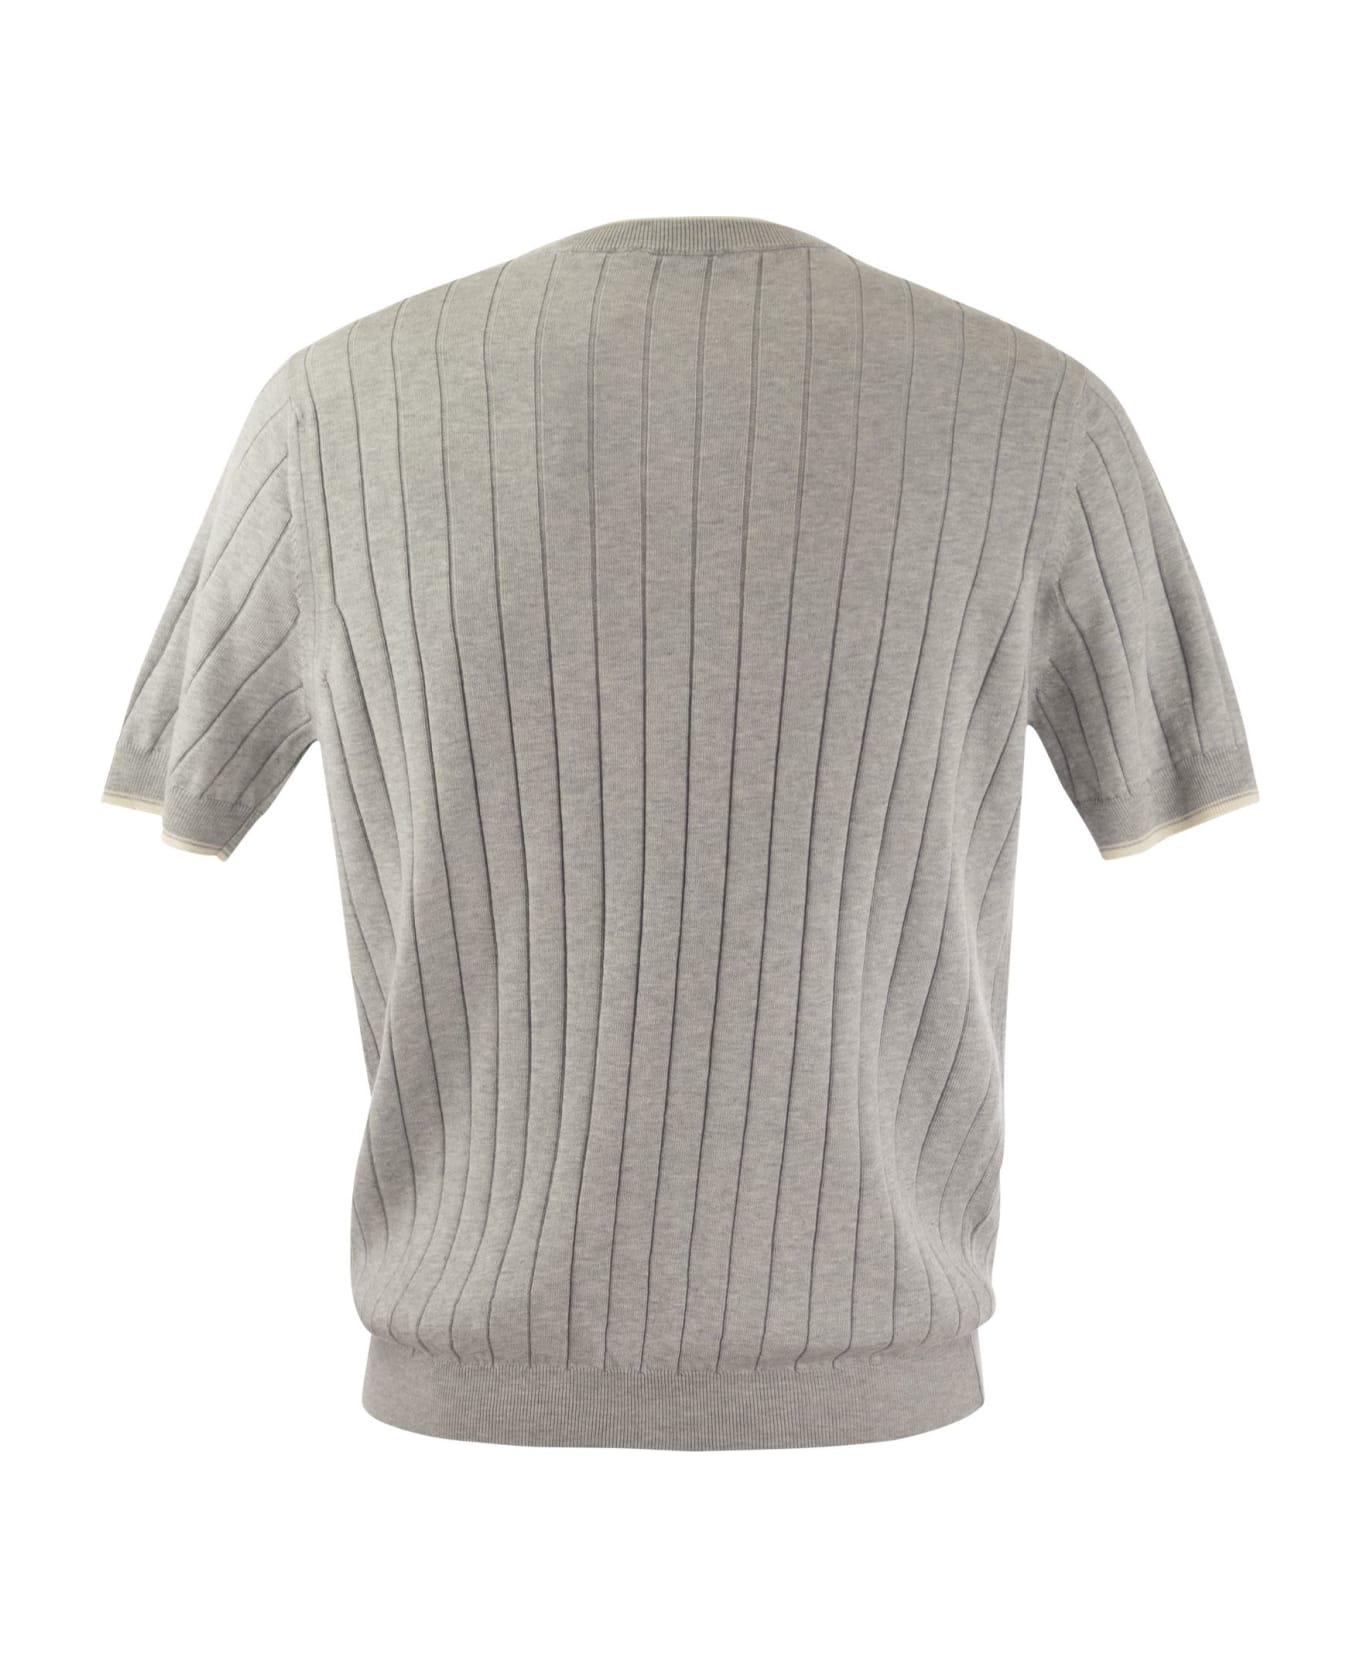 Peserico T-shirt In Pure Cotton Crépe Yarn - Grey/white